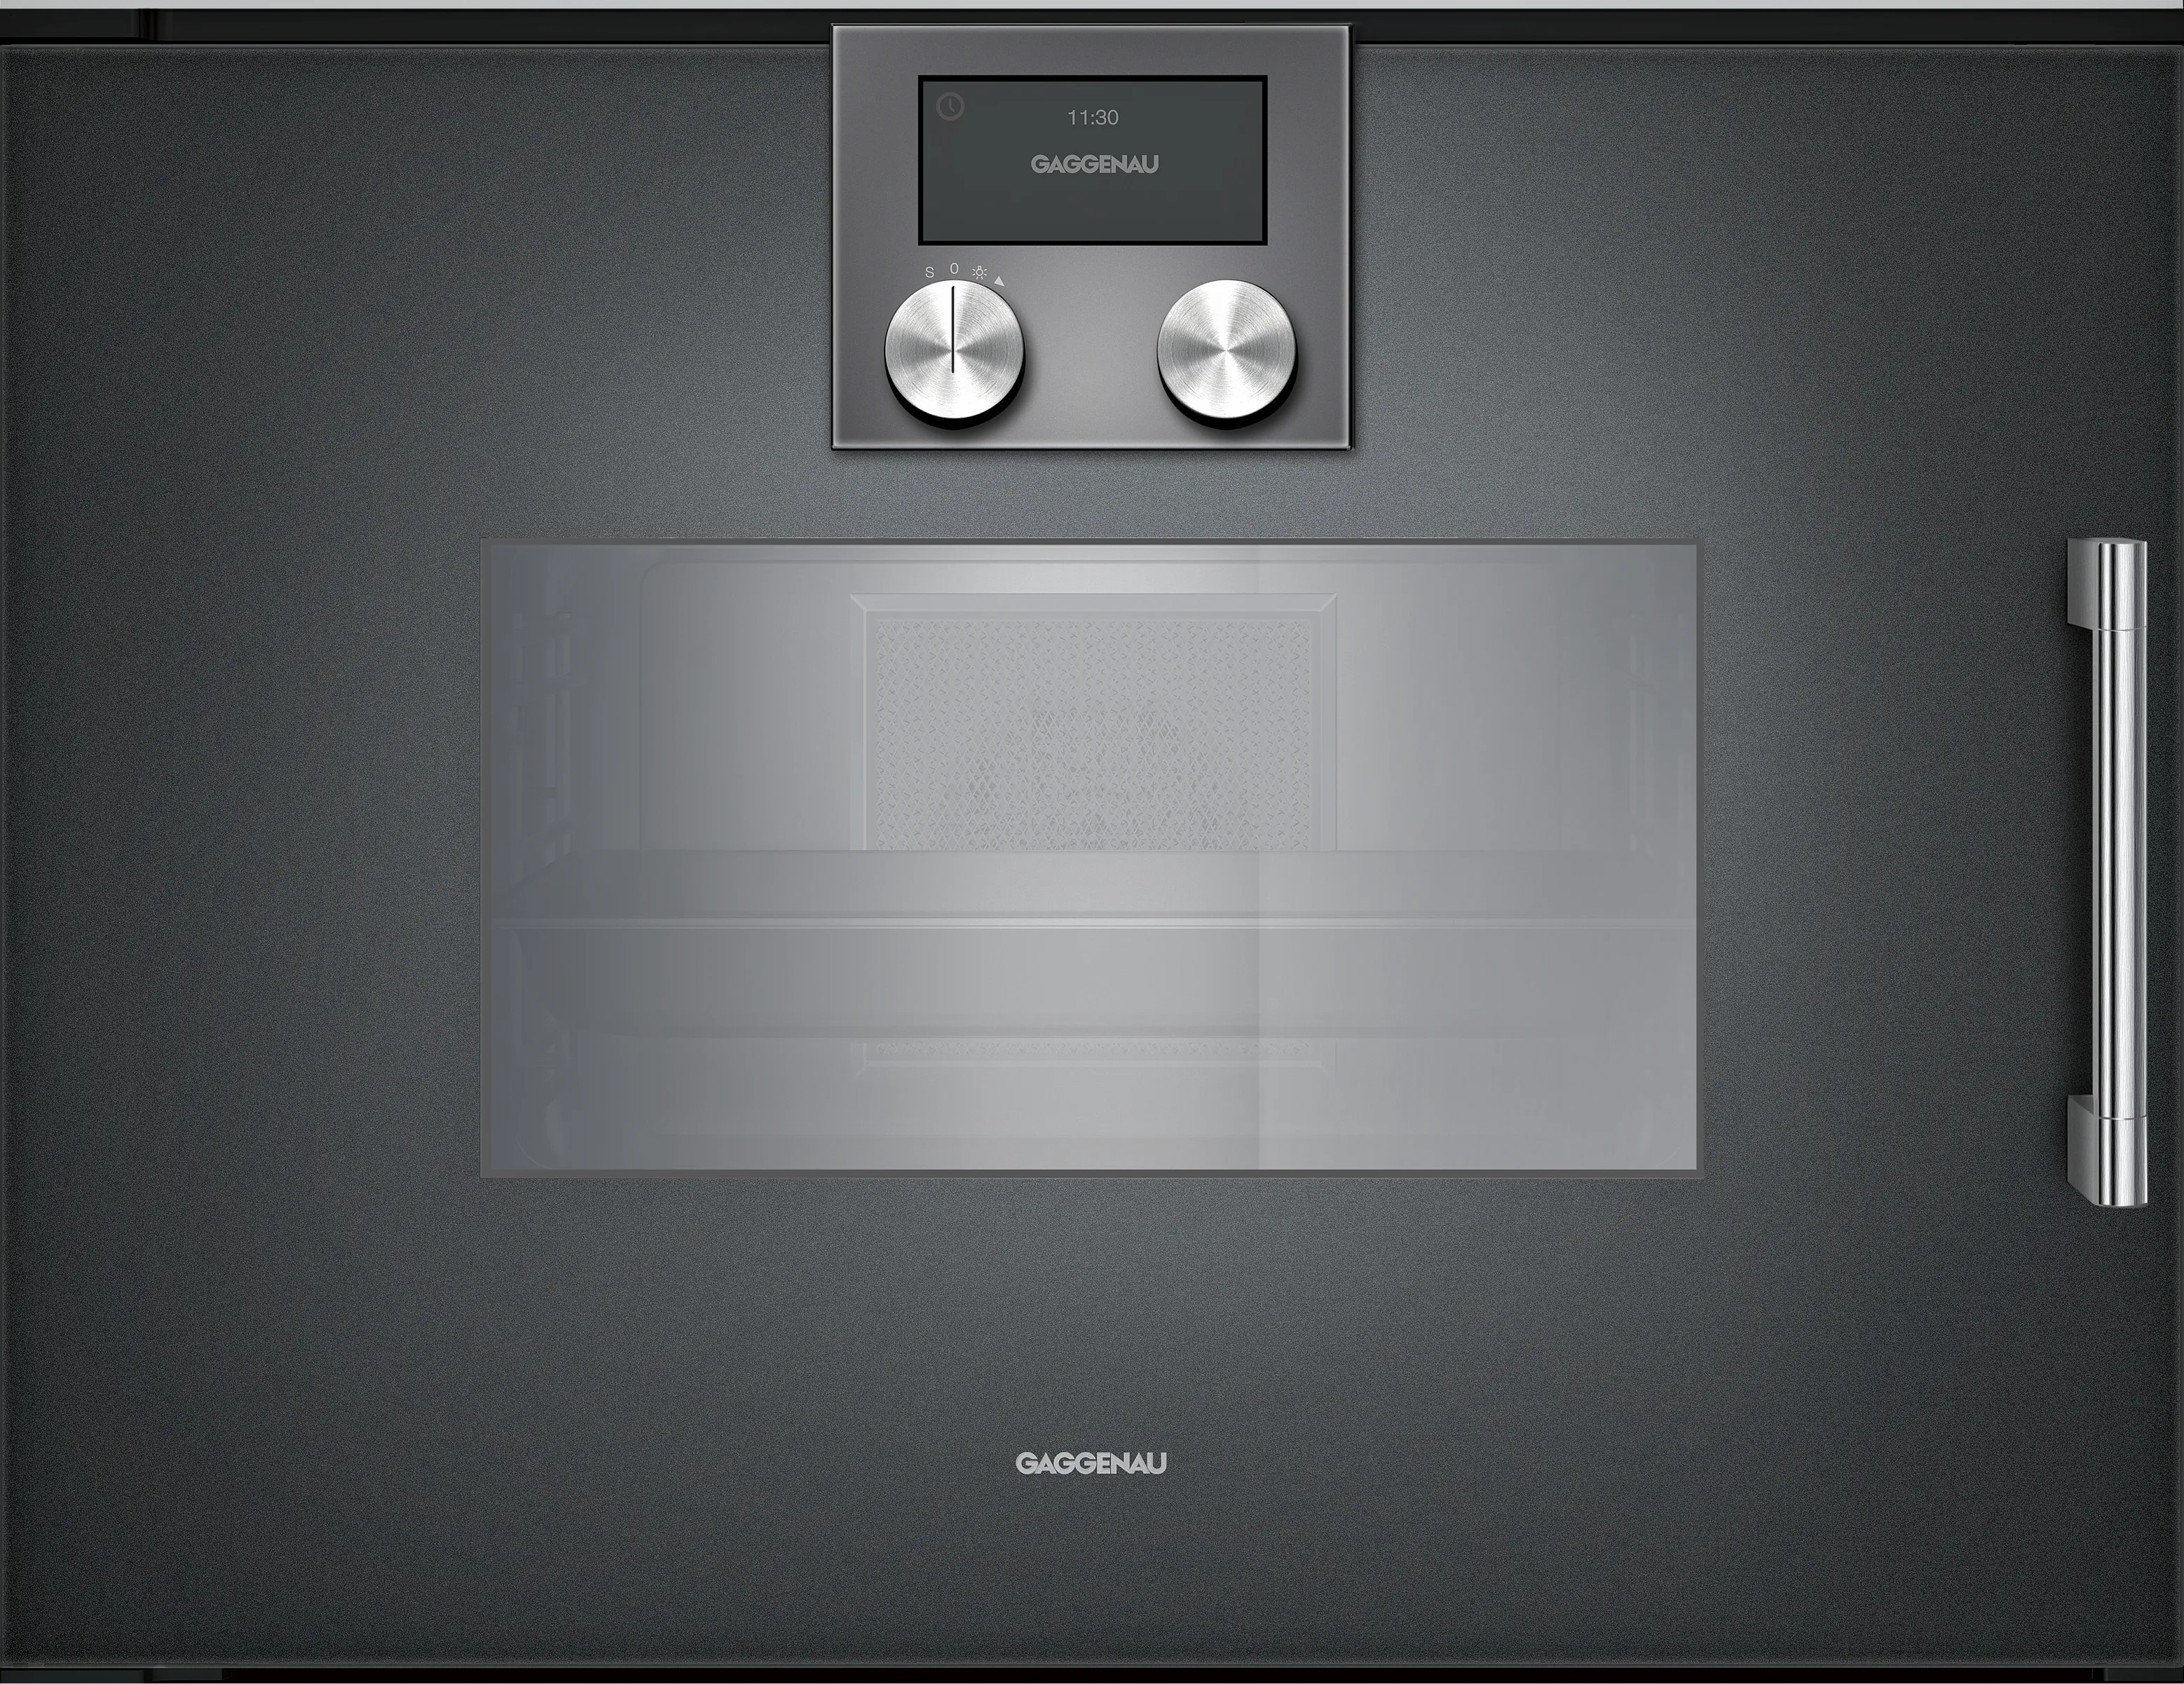 200 series Built-in compact oven with steam function 60 x 45 cm Door hinge: Left, Gaggenau Anthracite 